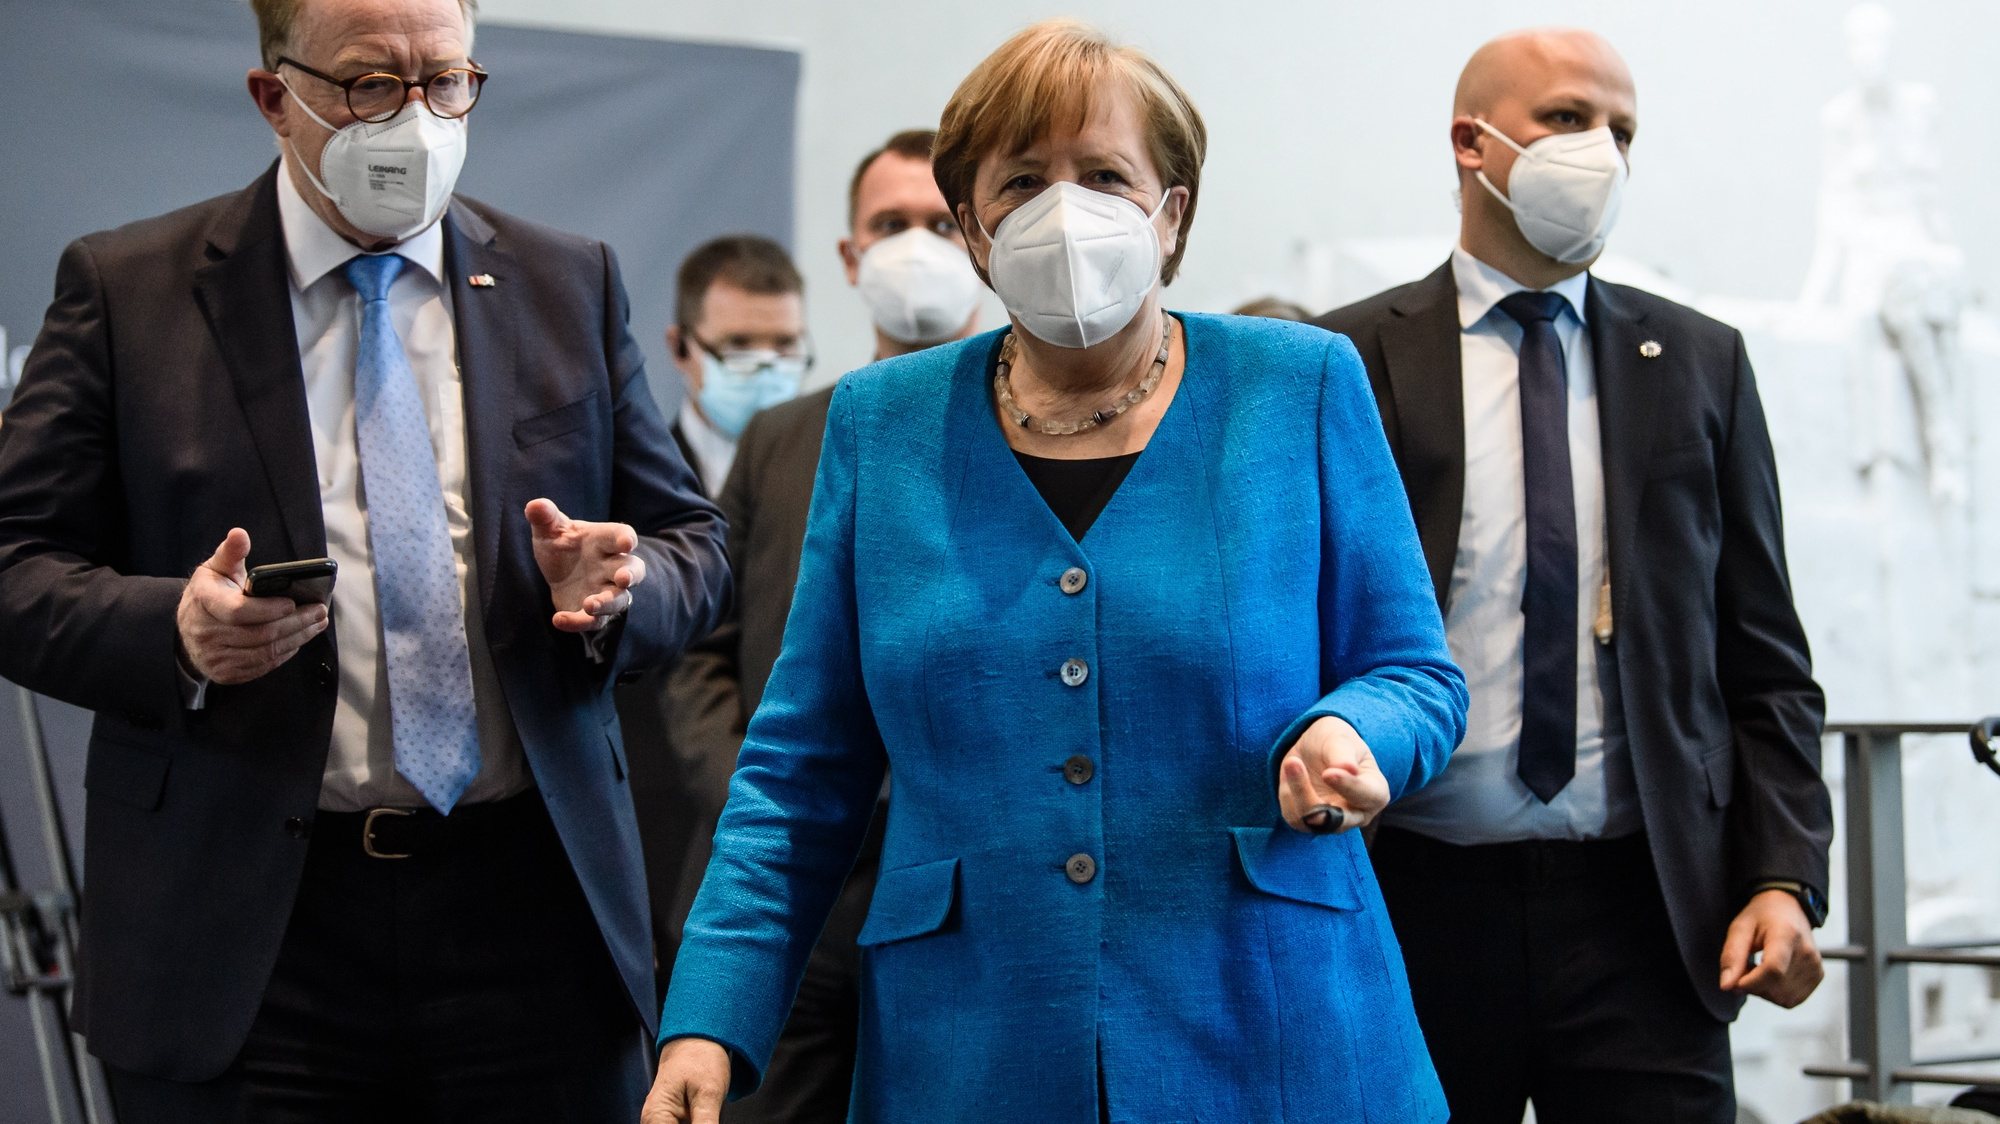 epa09154835 German Chancellor Angela Merkel (C) walks back into the hearing room next to deputy chairman of the Wirecard investigation committee Hans Michelbach (L) after a break of a session of the Wirecard investigation committee at Paul-Loebe-Haus in Berlin, 23 April 2021. The committee is dealing with the scandal related to the market manipulation of service provider Wirecard.  EPA/CLEMENS BILAN